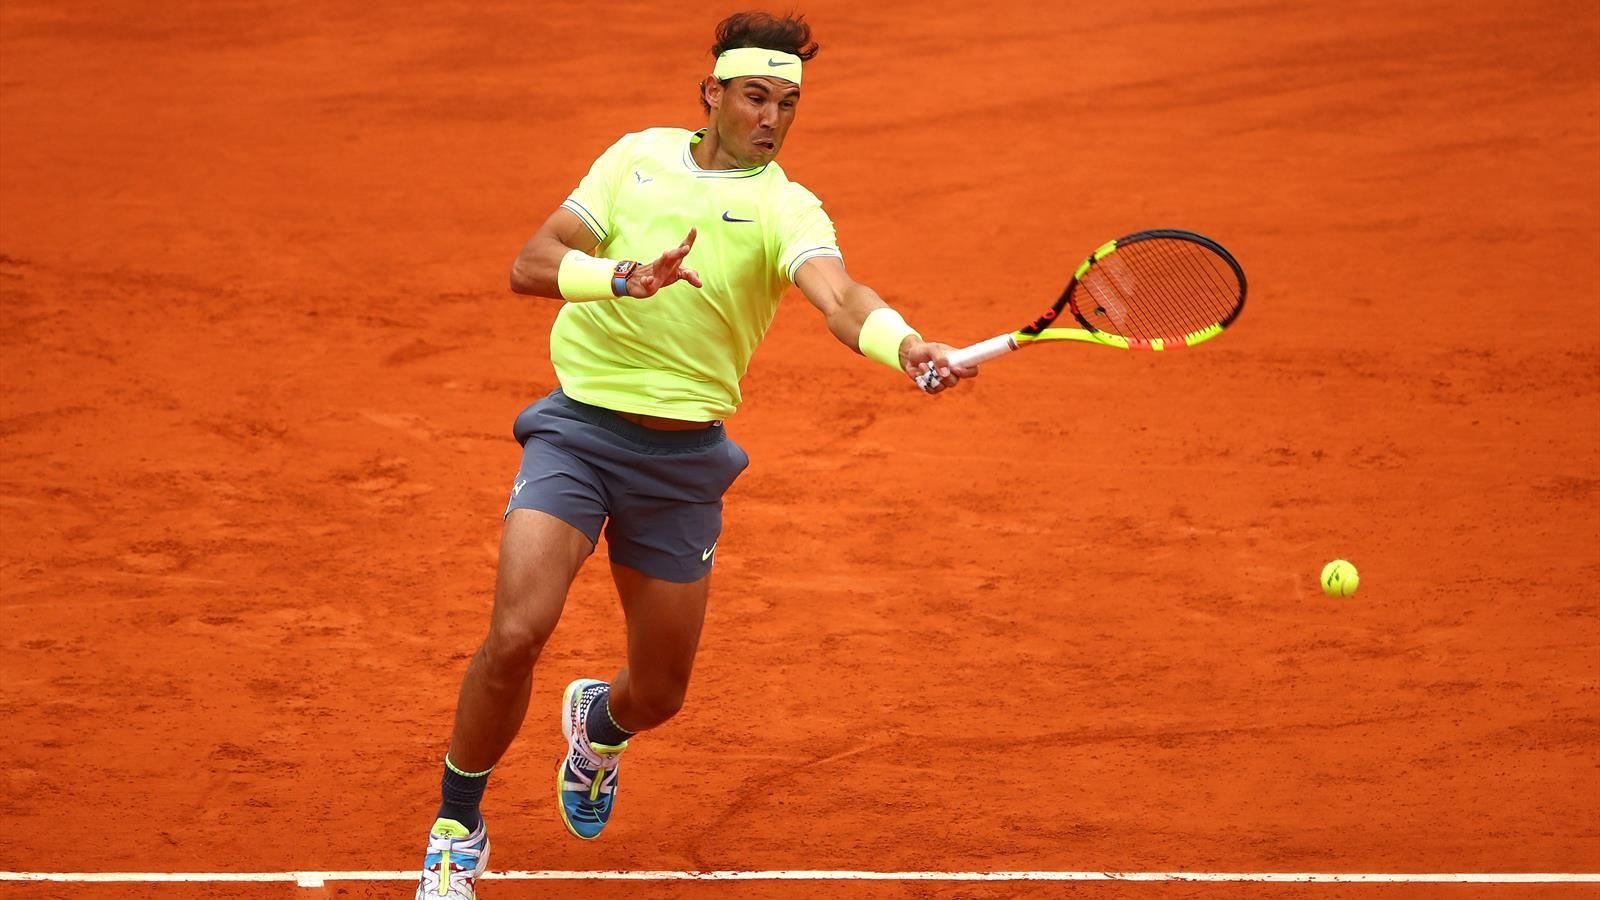 VIDEO Open 2019: Rafael Nadal breaks with stunning forehand